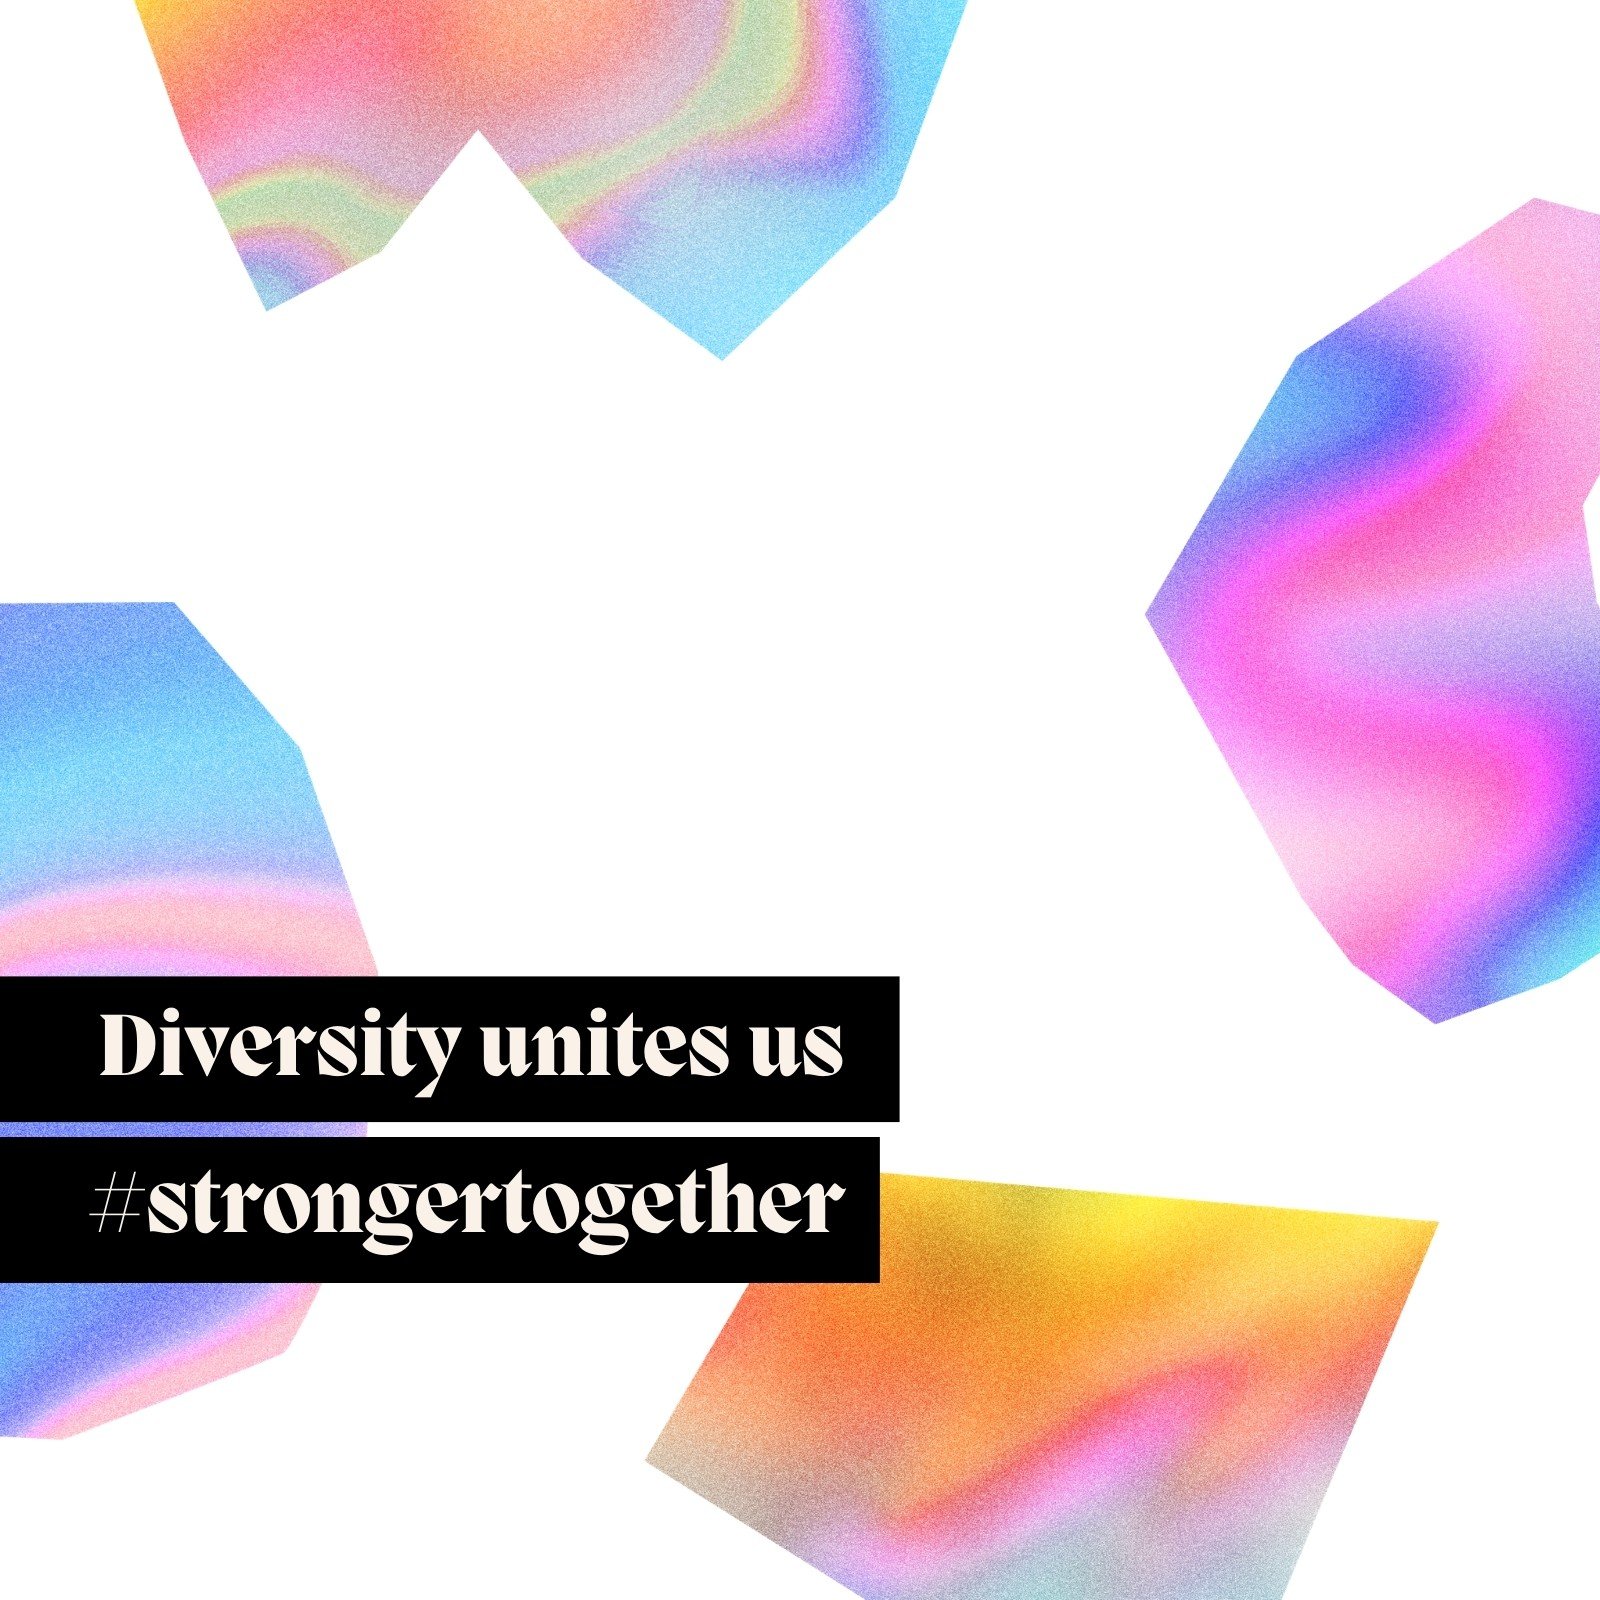 Colorful Gradient Diversity Representation and Equality Facebook Profile Frame